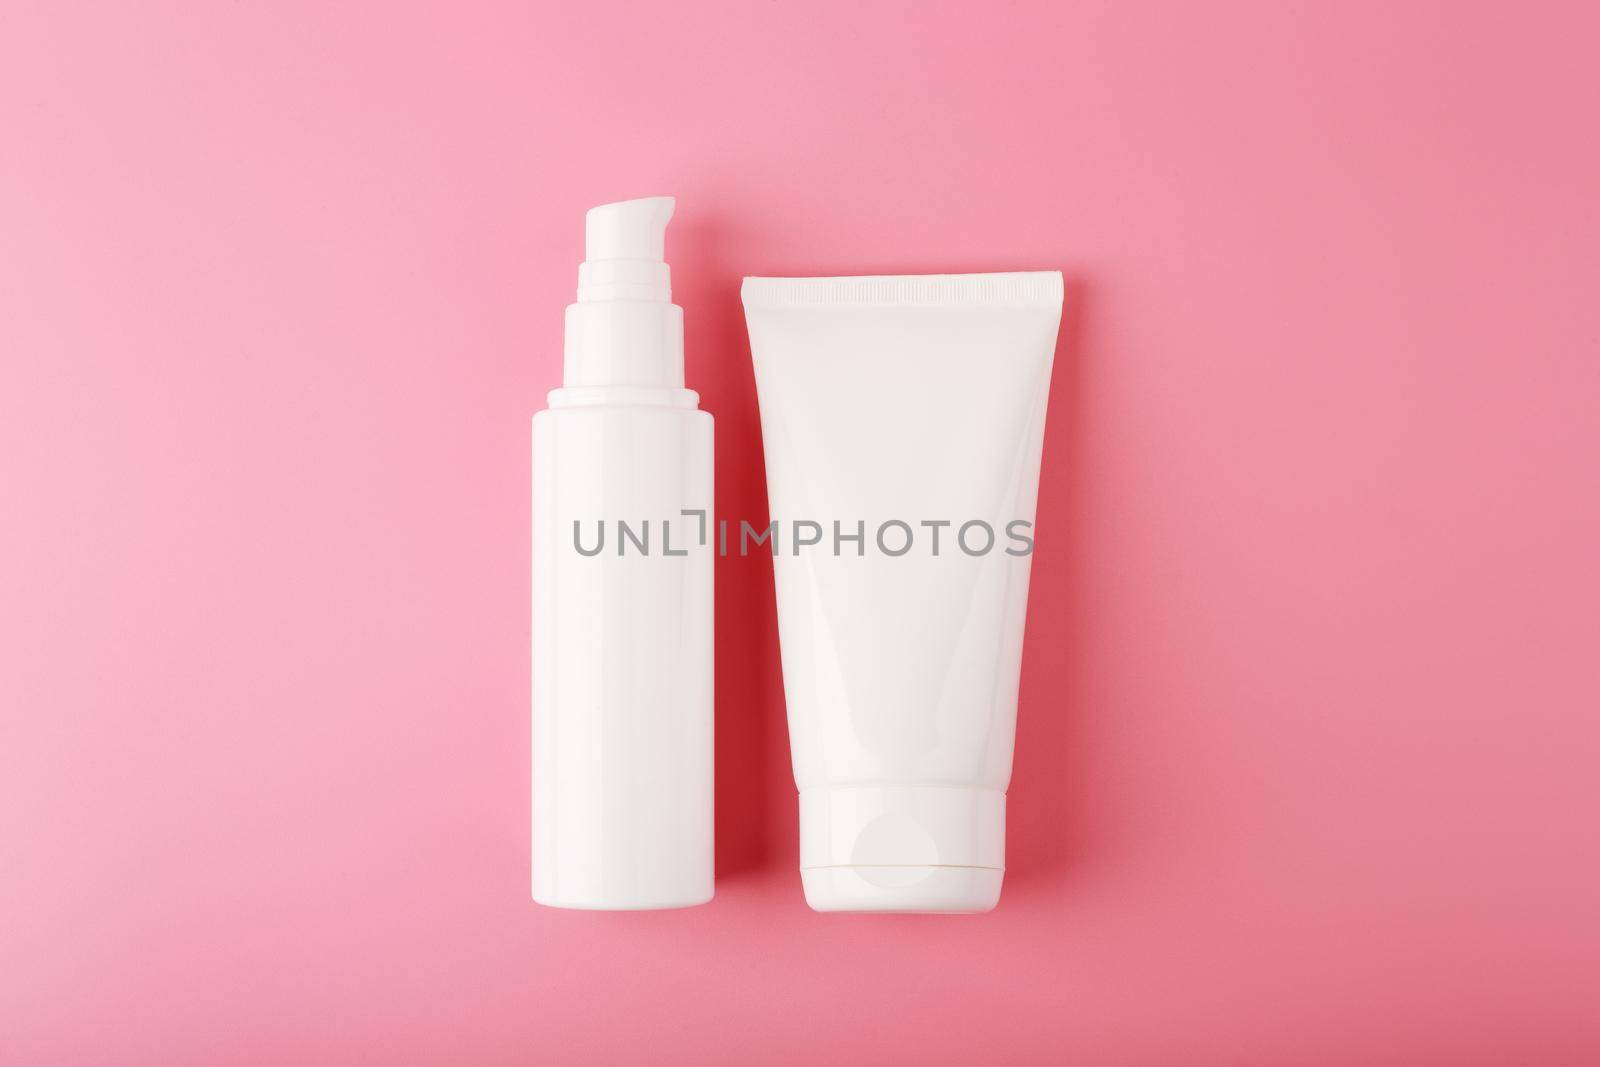 Minimalistic flat lay with two white cream tubes on pink background. Concept of beauty products for skin hydration, moisturizing, anti aging treatment of exfoliation